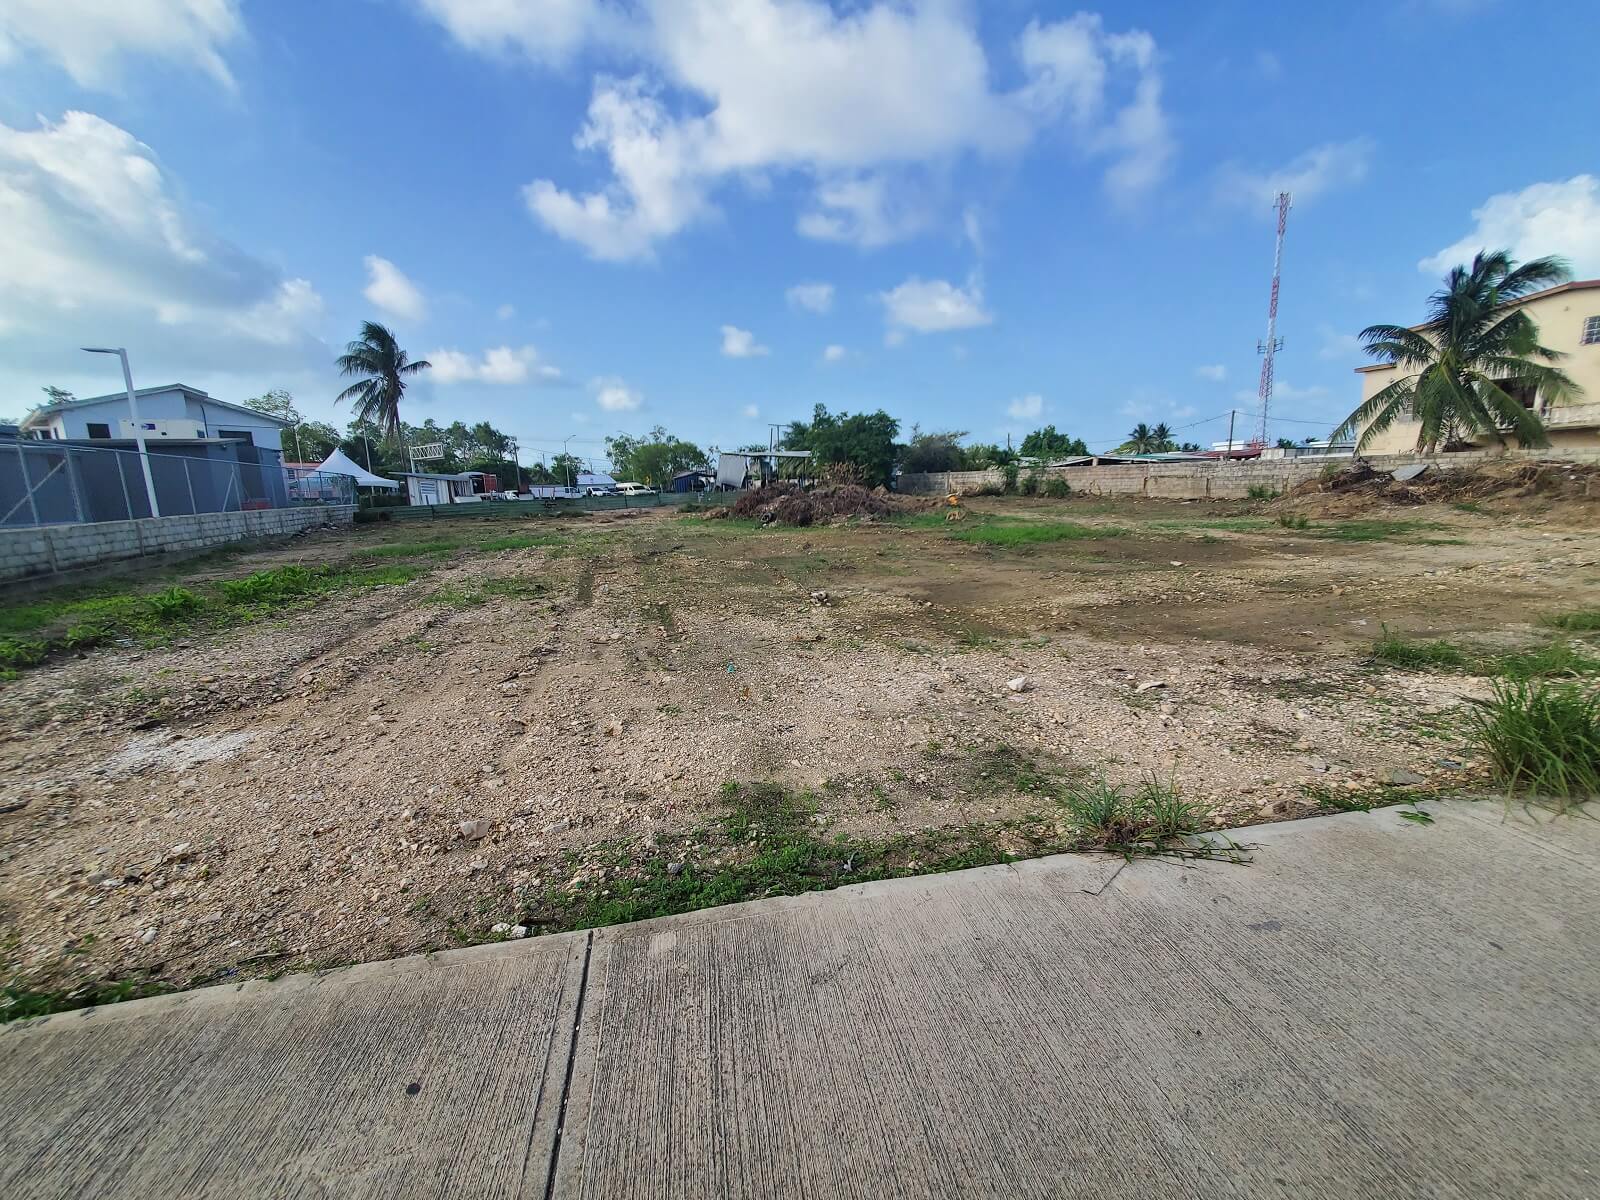 Lot for Lease located on the George Price Highway